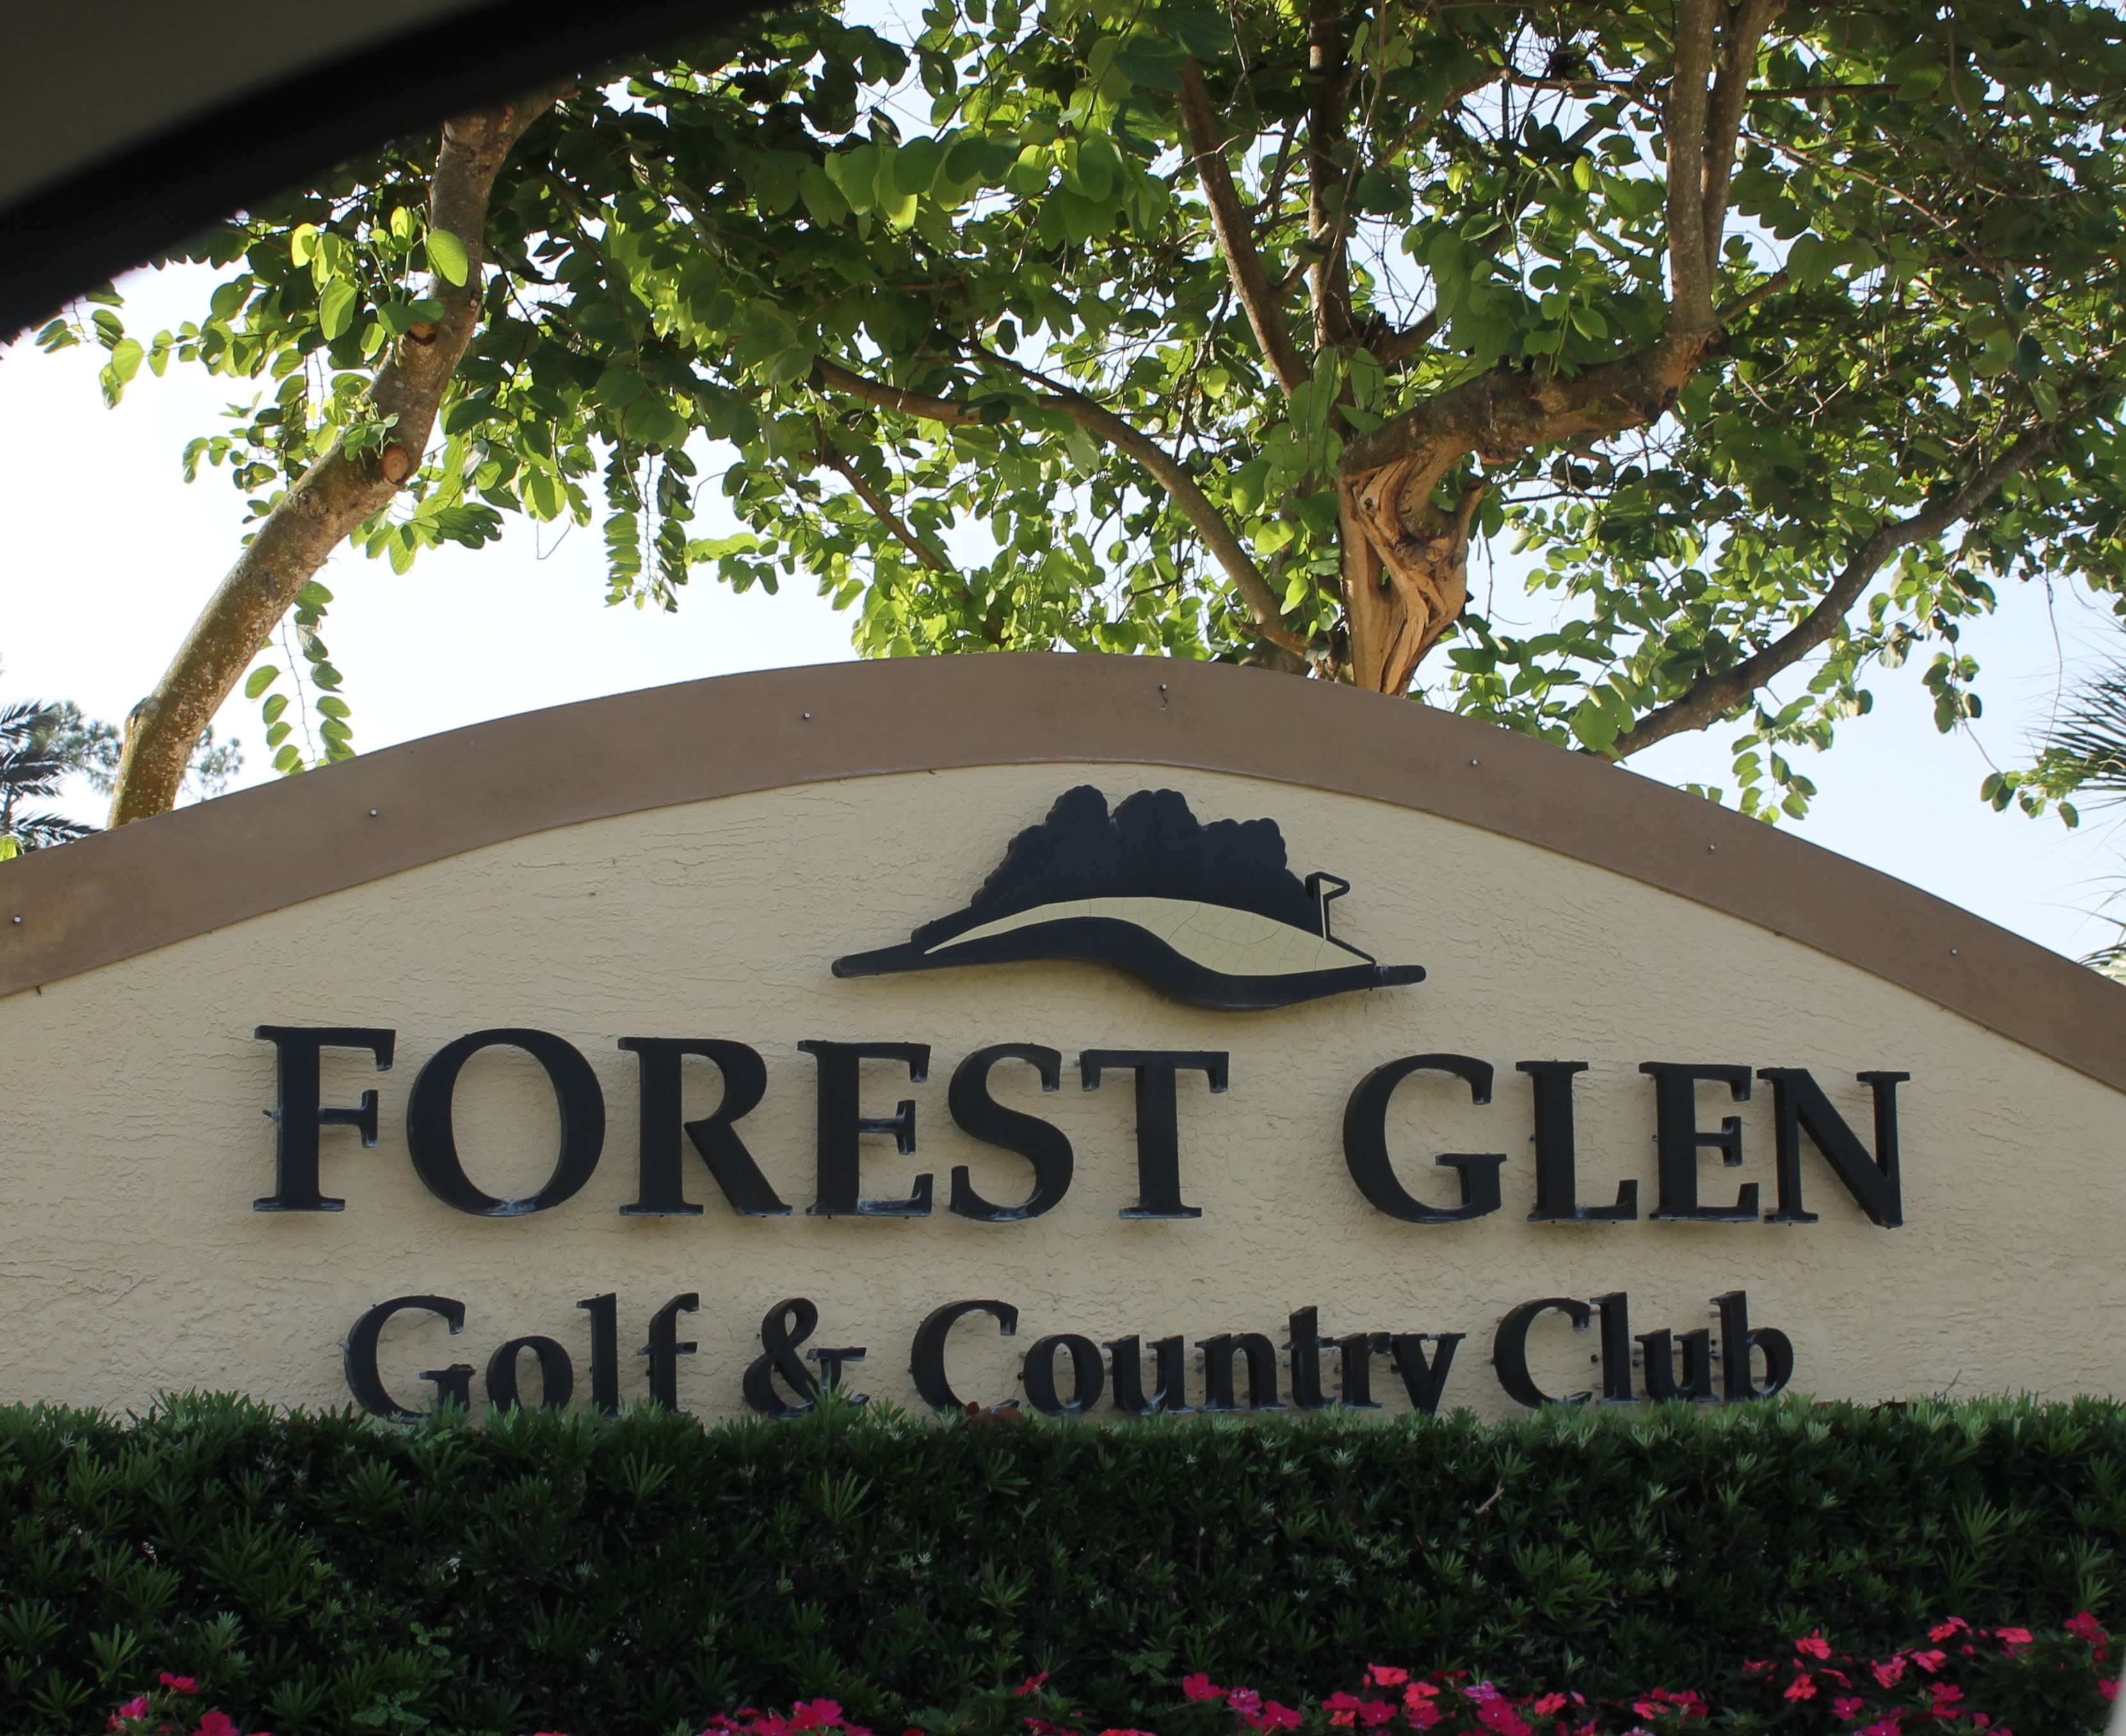 Forest Glen homes for sale and luxury real estate for sale in Forest Glen, a Marco Island community and luxury neighborhood in Marco Island Florida.